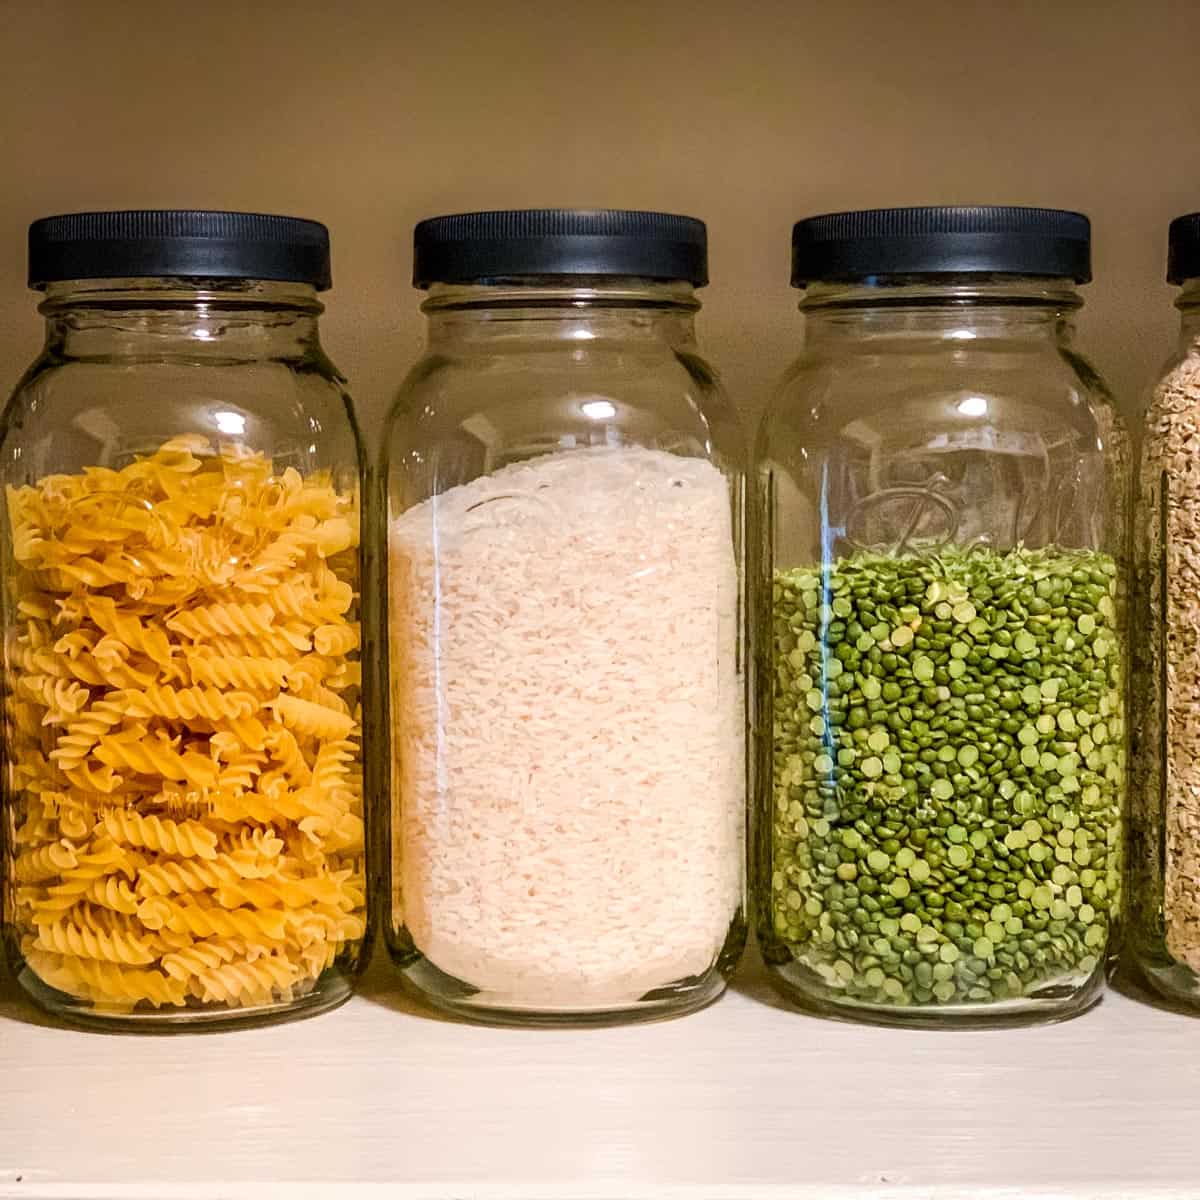 half gallon ball jars filled with pantry food items